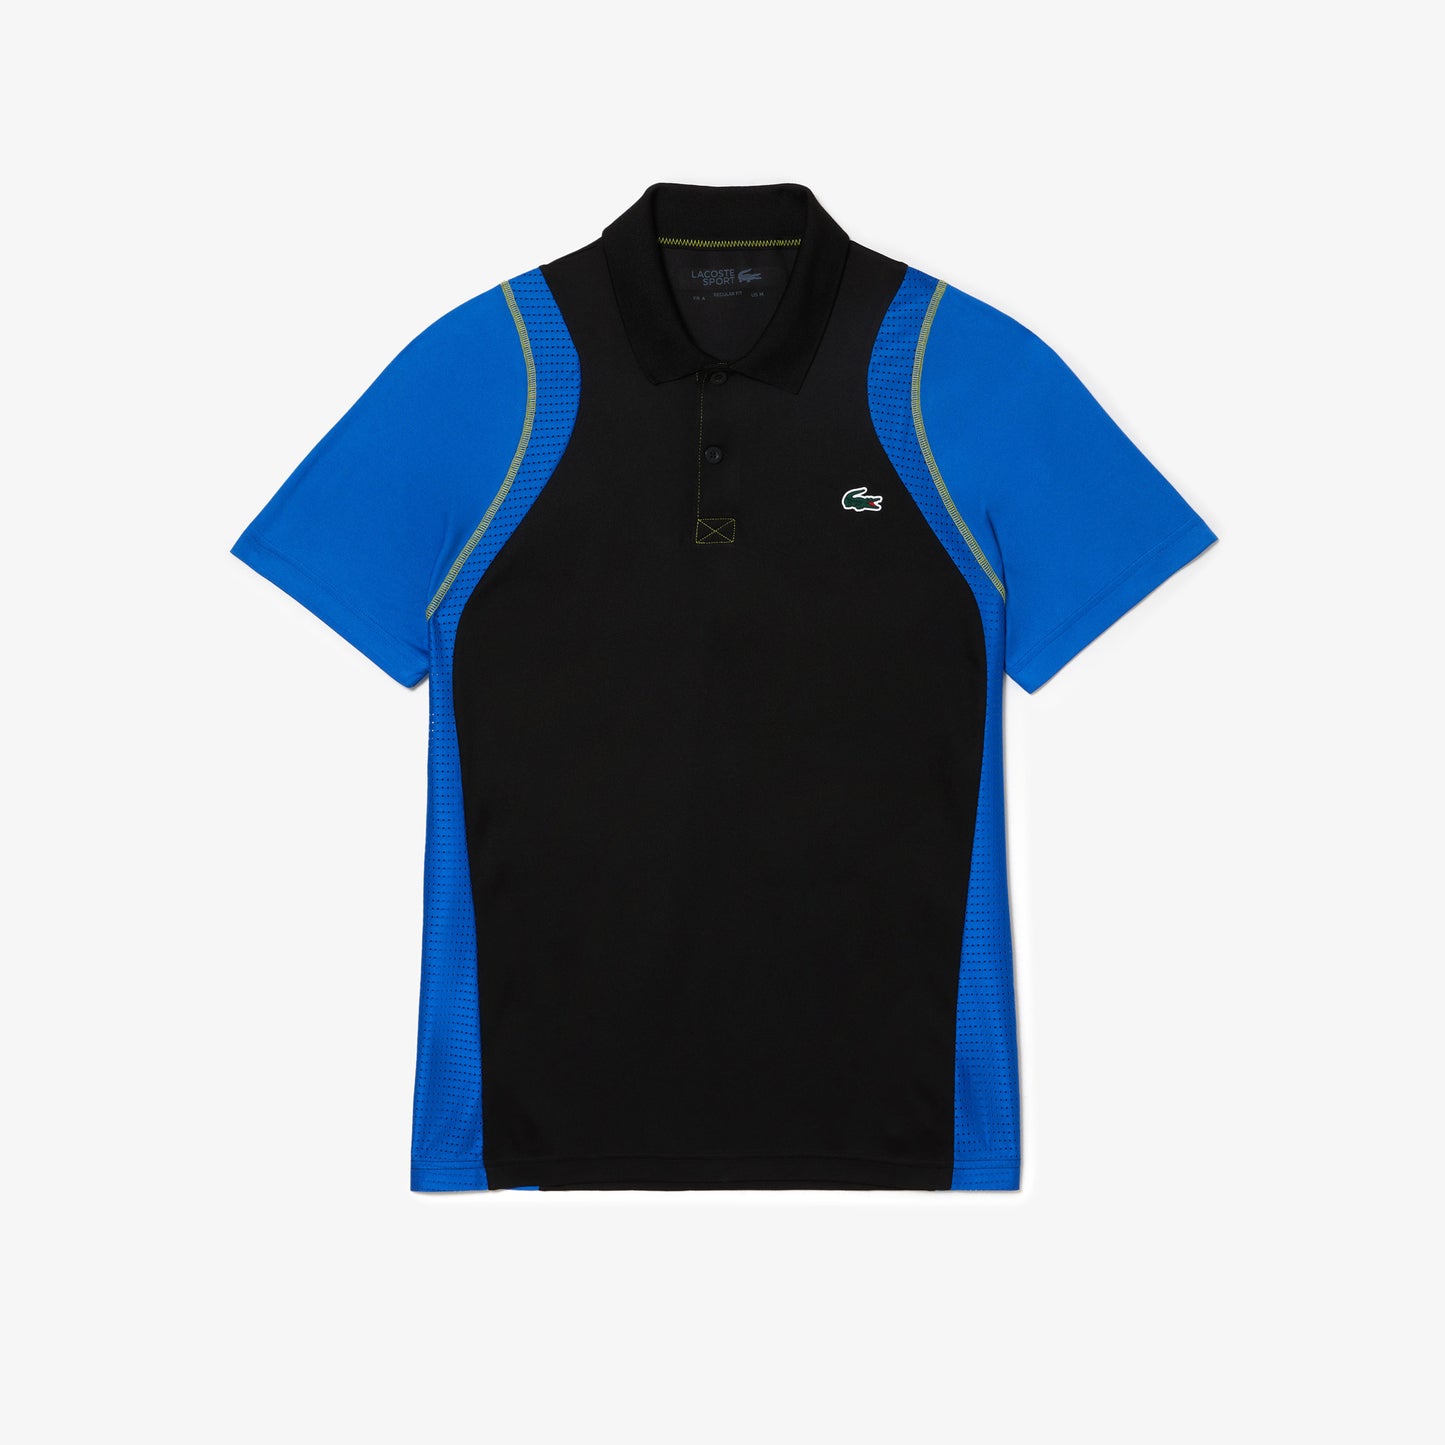 LACOSTE ULTRA DRY TENNIS POLO SHIRT